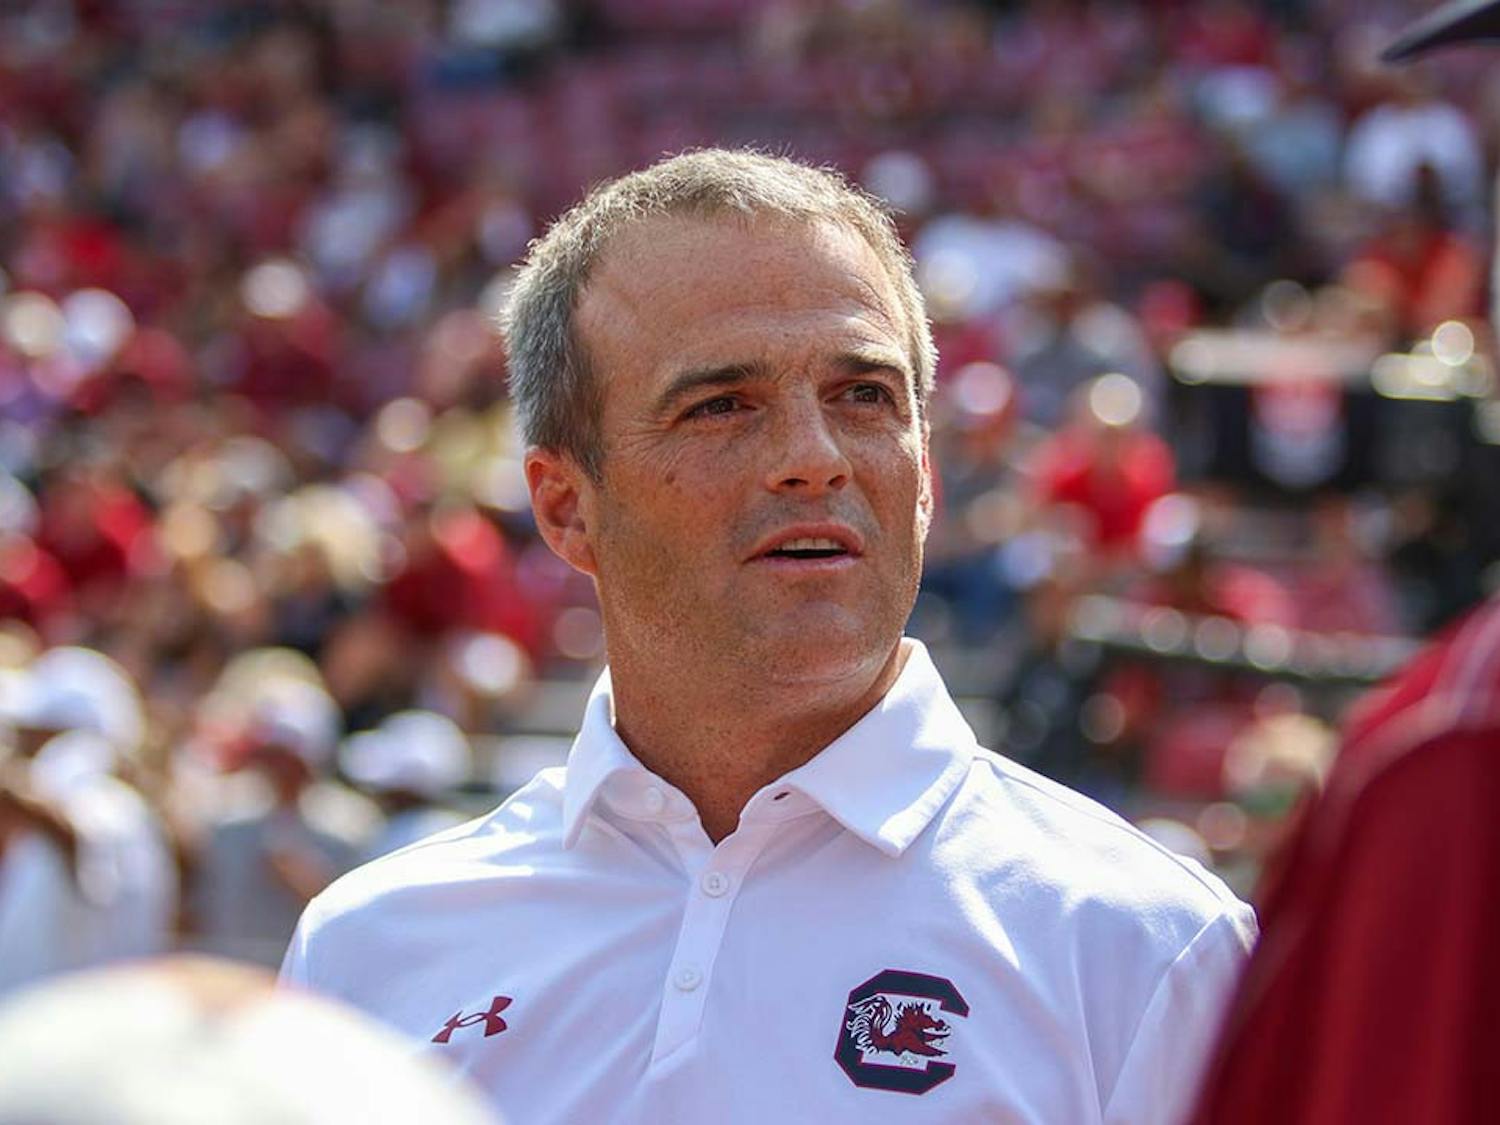 Head football coach Shane Beamer preparing for the start of the Gamecocks’ match against the no. 1 Georgia Bulldogs on Sep. 17, 2022.